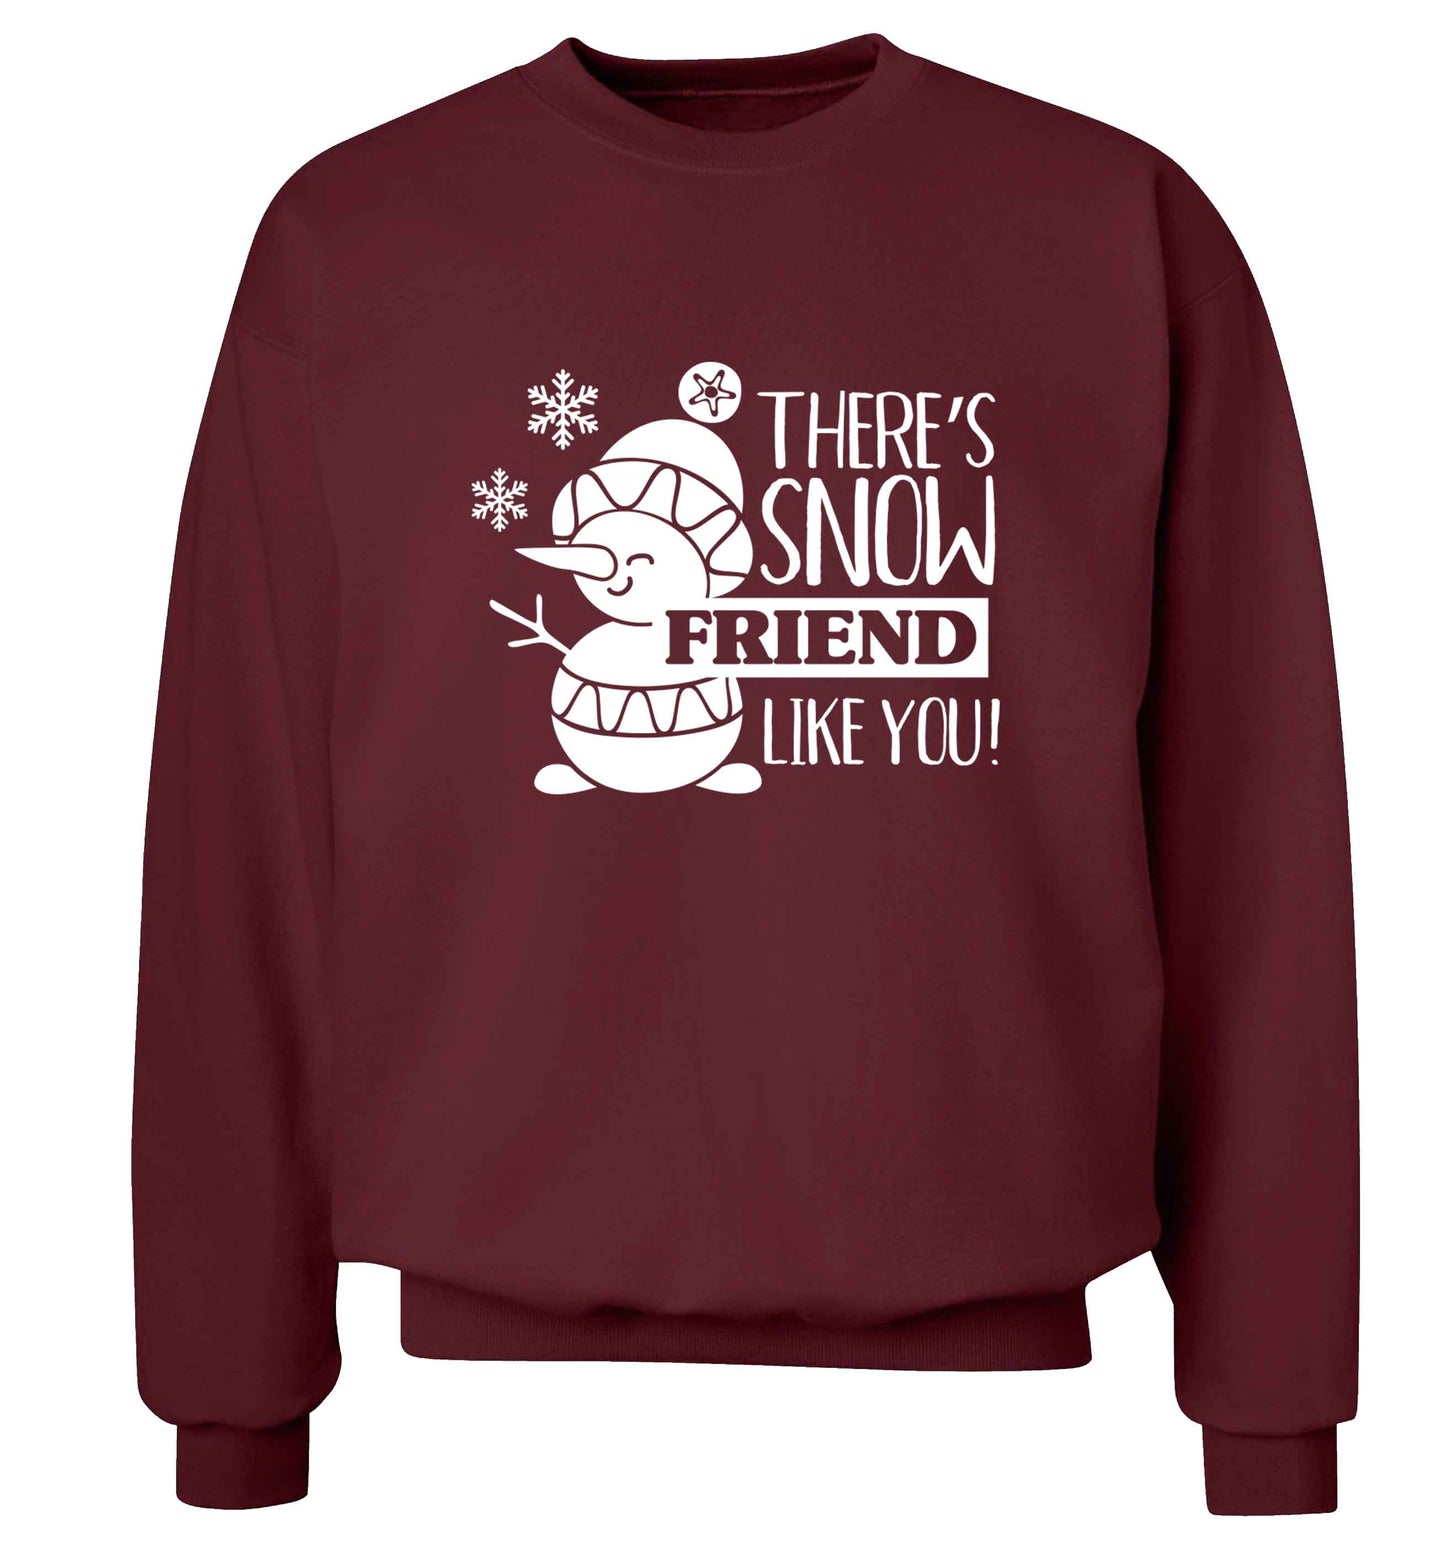 There's snow friend like you adult's unisex maroon sweater 2XL